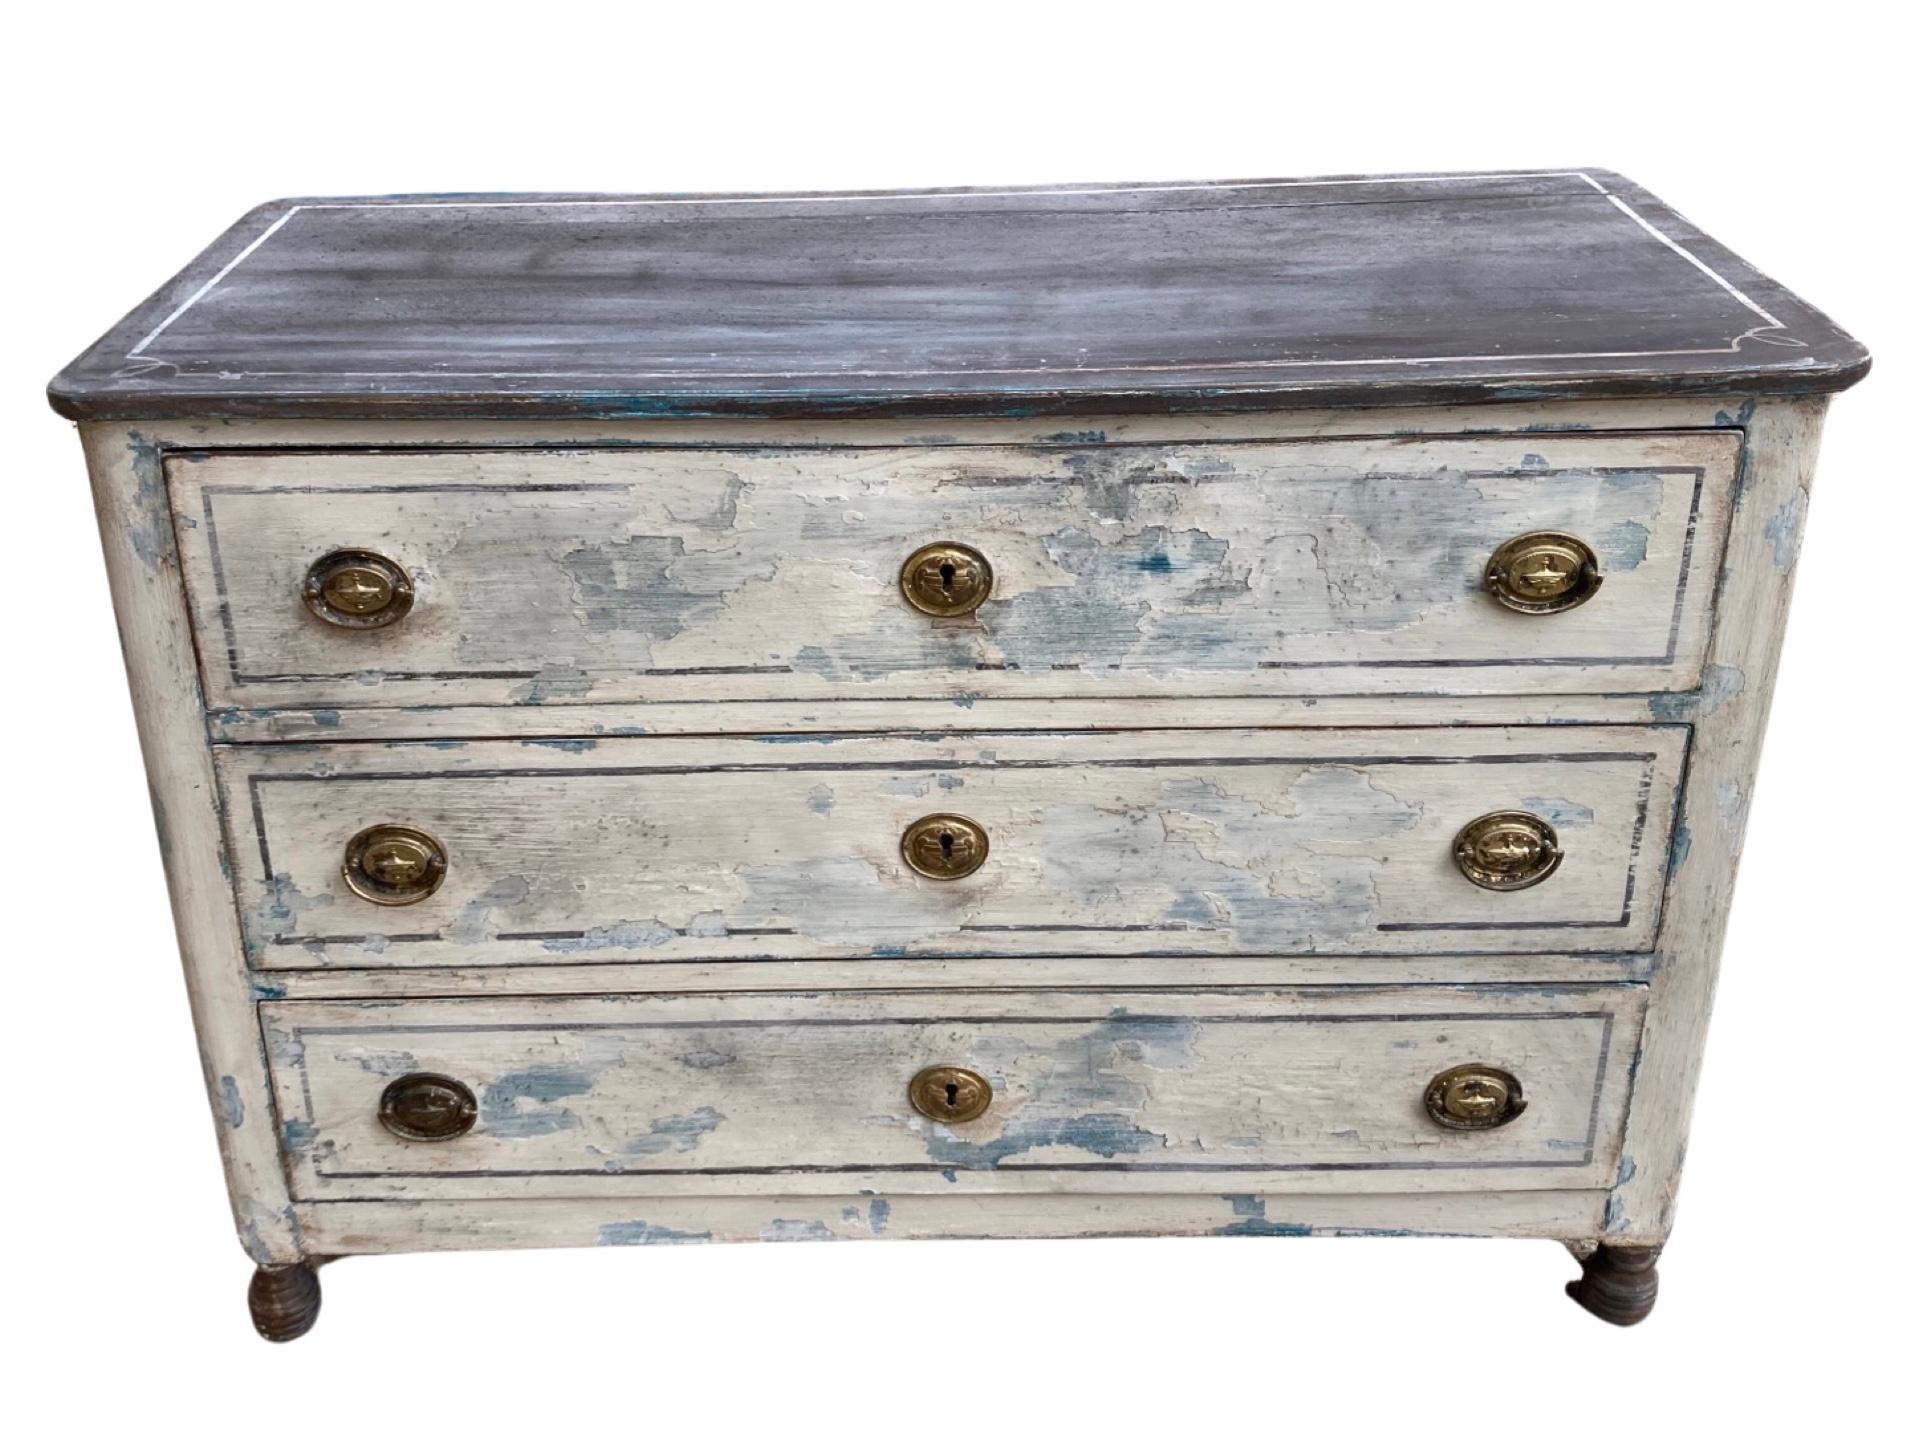 Commode handmade in Italy in the mid 1900 using walnut. The commode has a beautiful painted patina that givess it a very unique look, however, the paint is not original to the piece. The commode features three very large inset drawers of about the